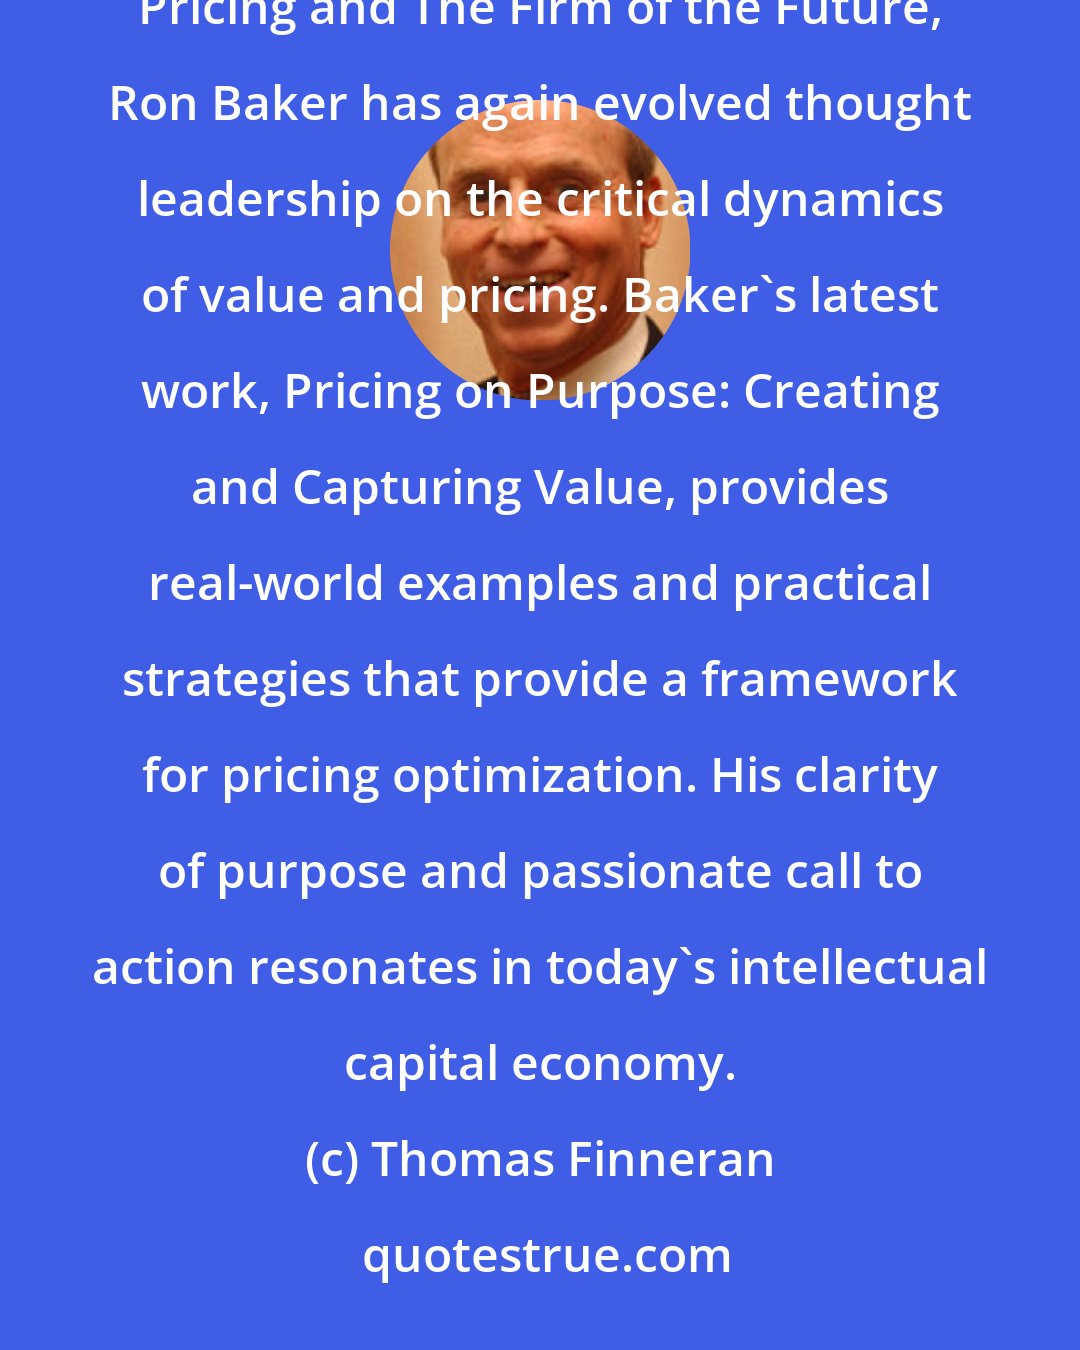 Thomas Finneran: Baker has done it again! Building on the core principles that he advanced in Professional's Guide to Value Pricing and The Firm of the Future, Ron Baker has again evolved thought leadership on the critical dynamics of value and pricing. Baker's latest work, Pricing on Purpose: Creating and Capturing Value, provides real-world examples and practical strategies that provide a framework for pricing optimization. His clarity of purpose and passionate call to action resonates in today's intellectual capital economy.